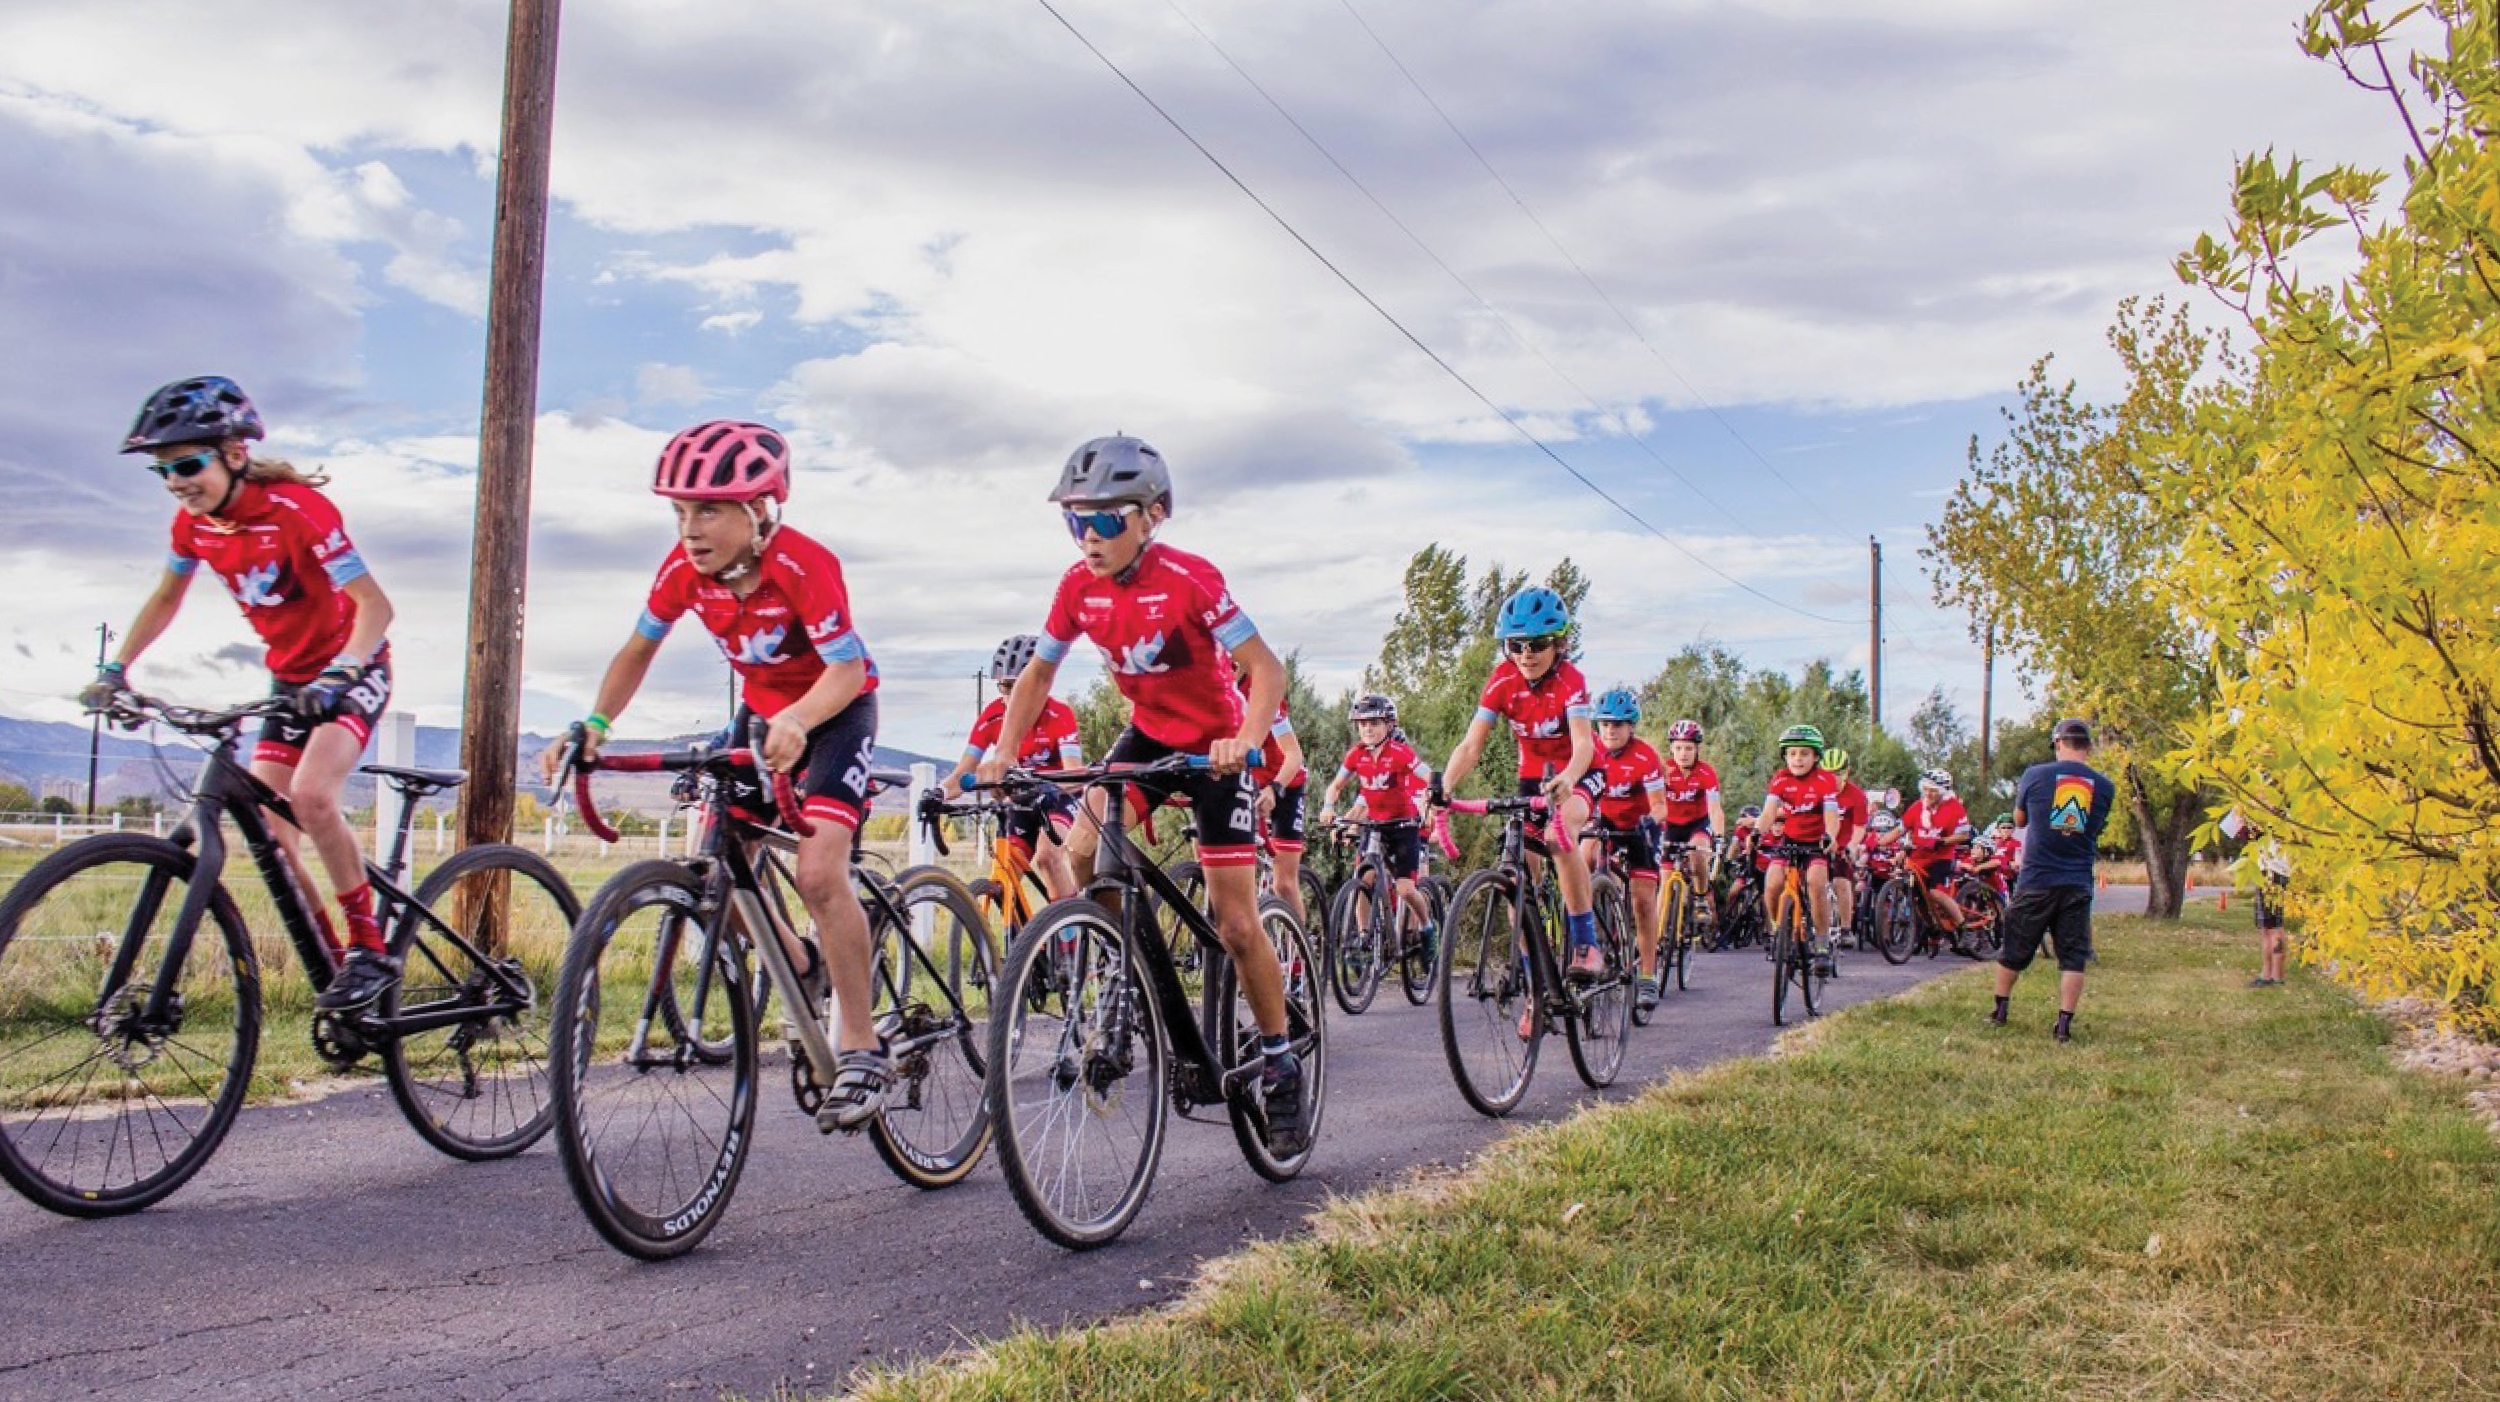 Boulder Junior Cycling riders compete during a bike race.